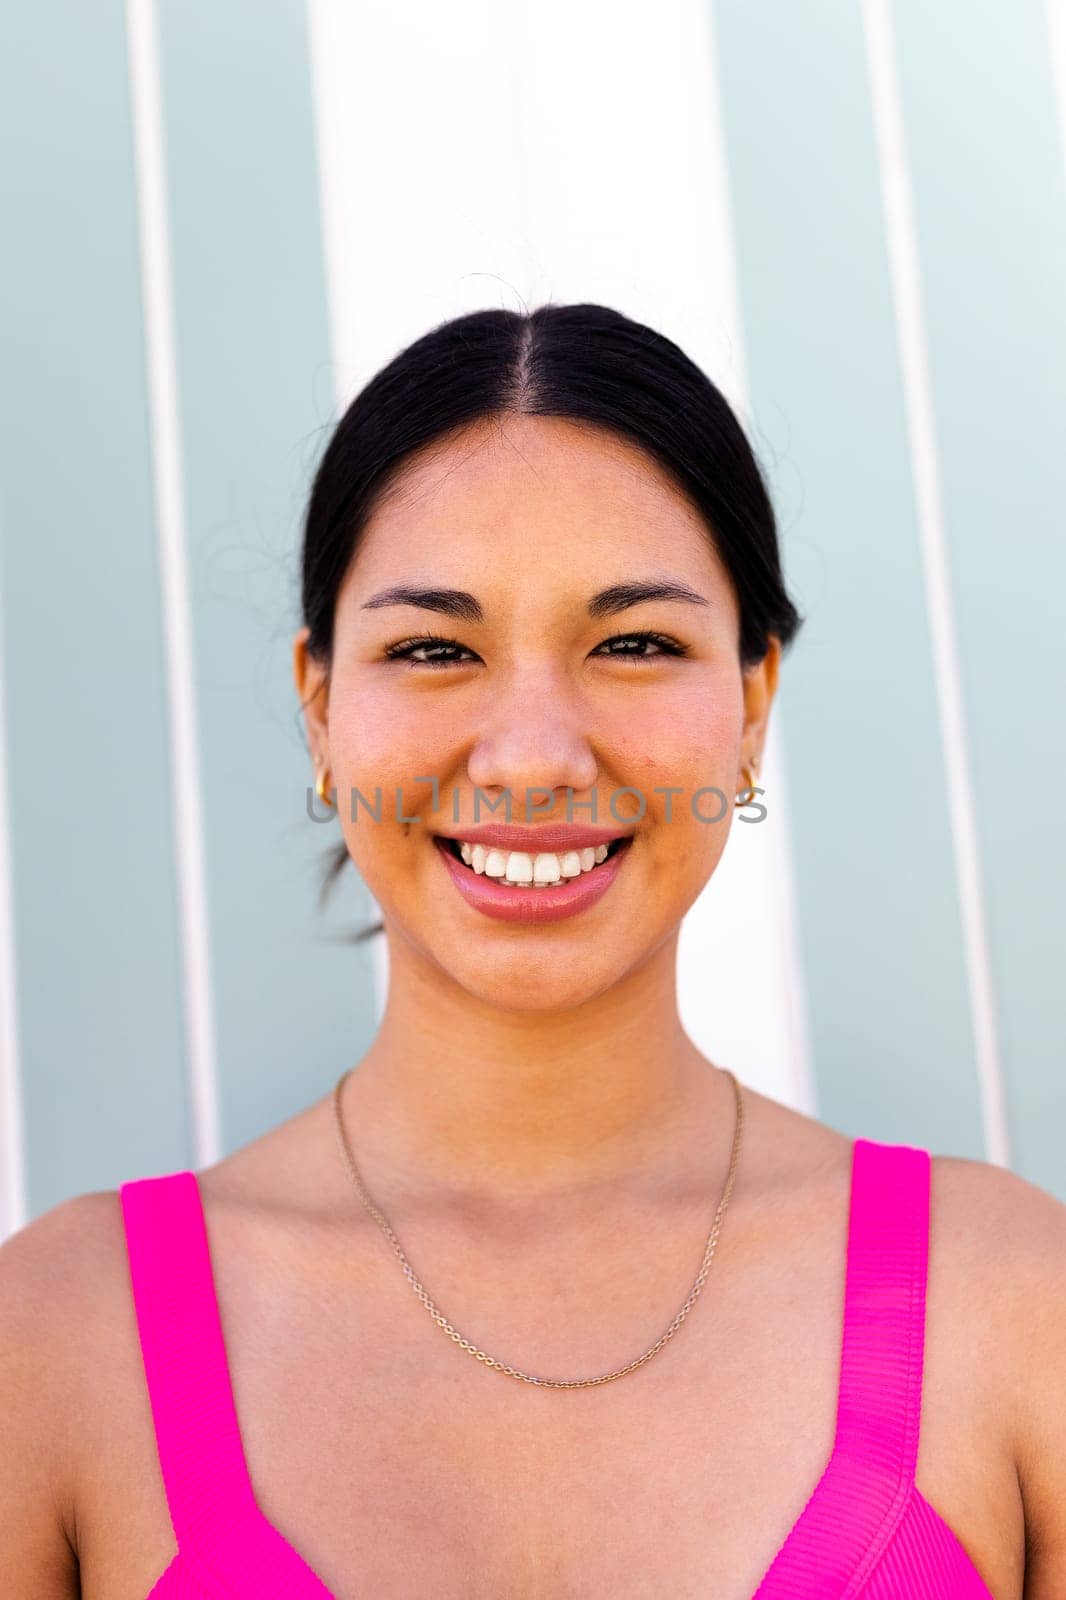 Headshot of young happy hispanic woman on vacation looking at camera.Vertical portrait.